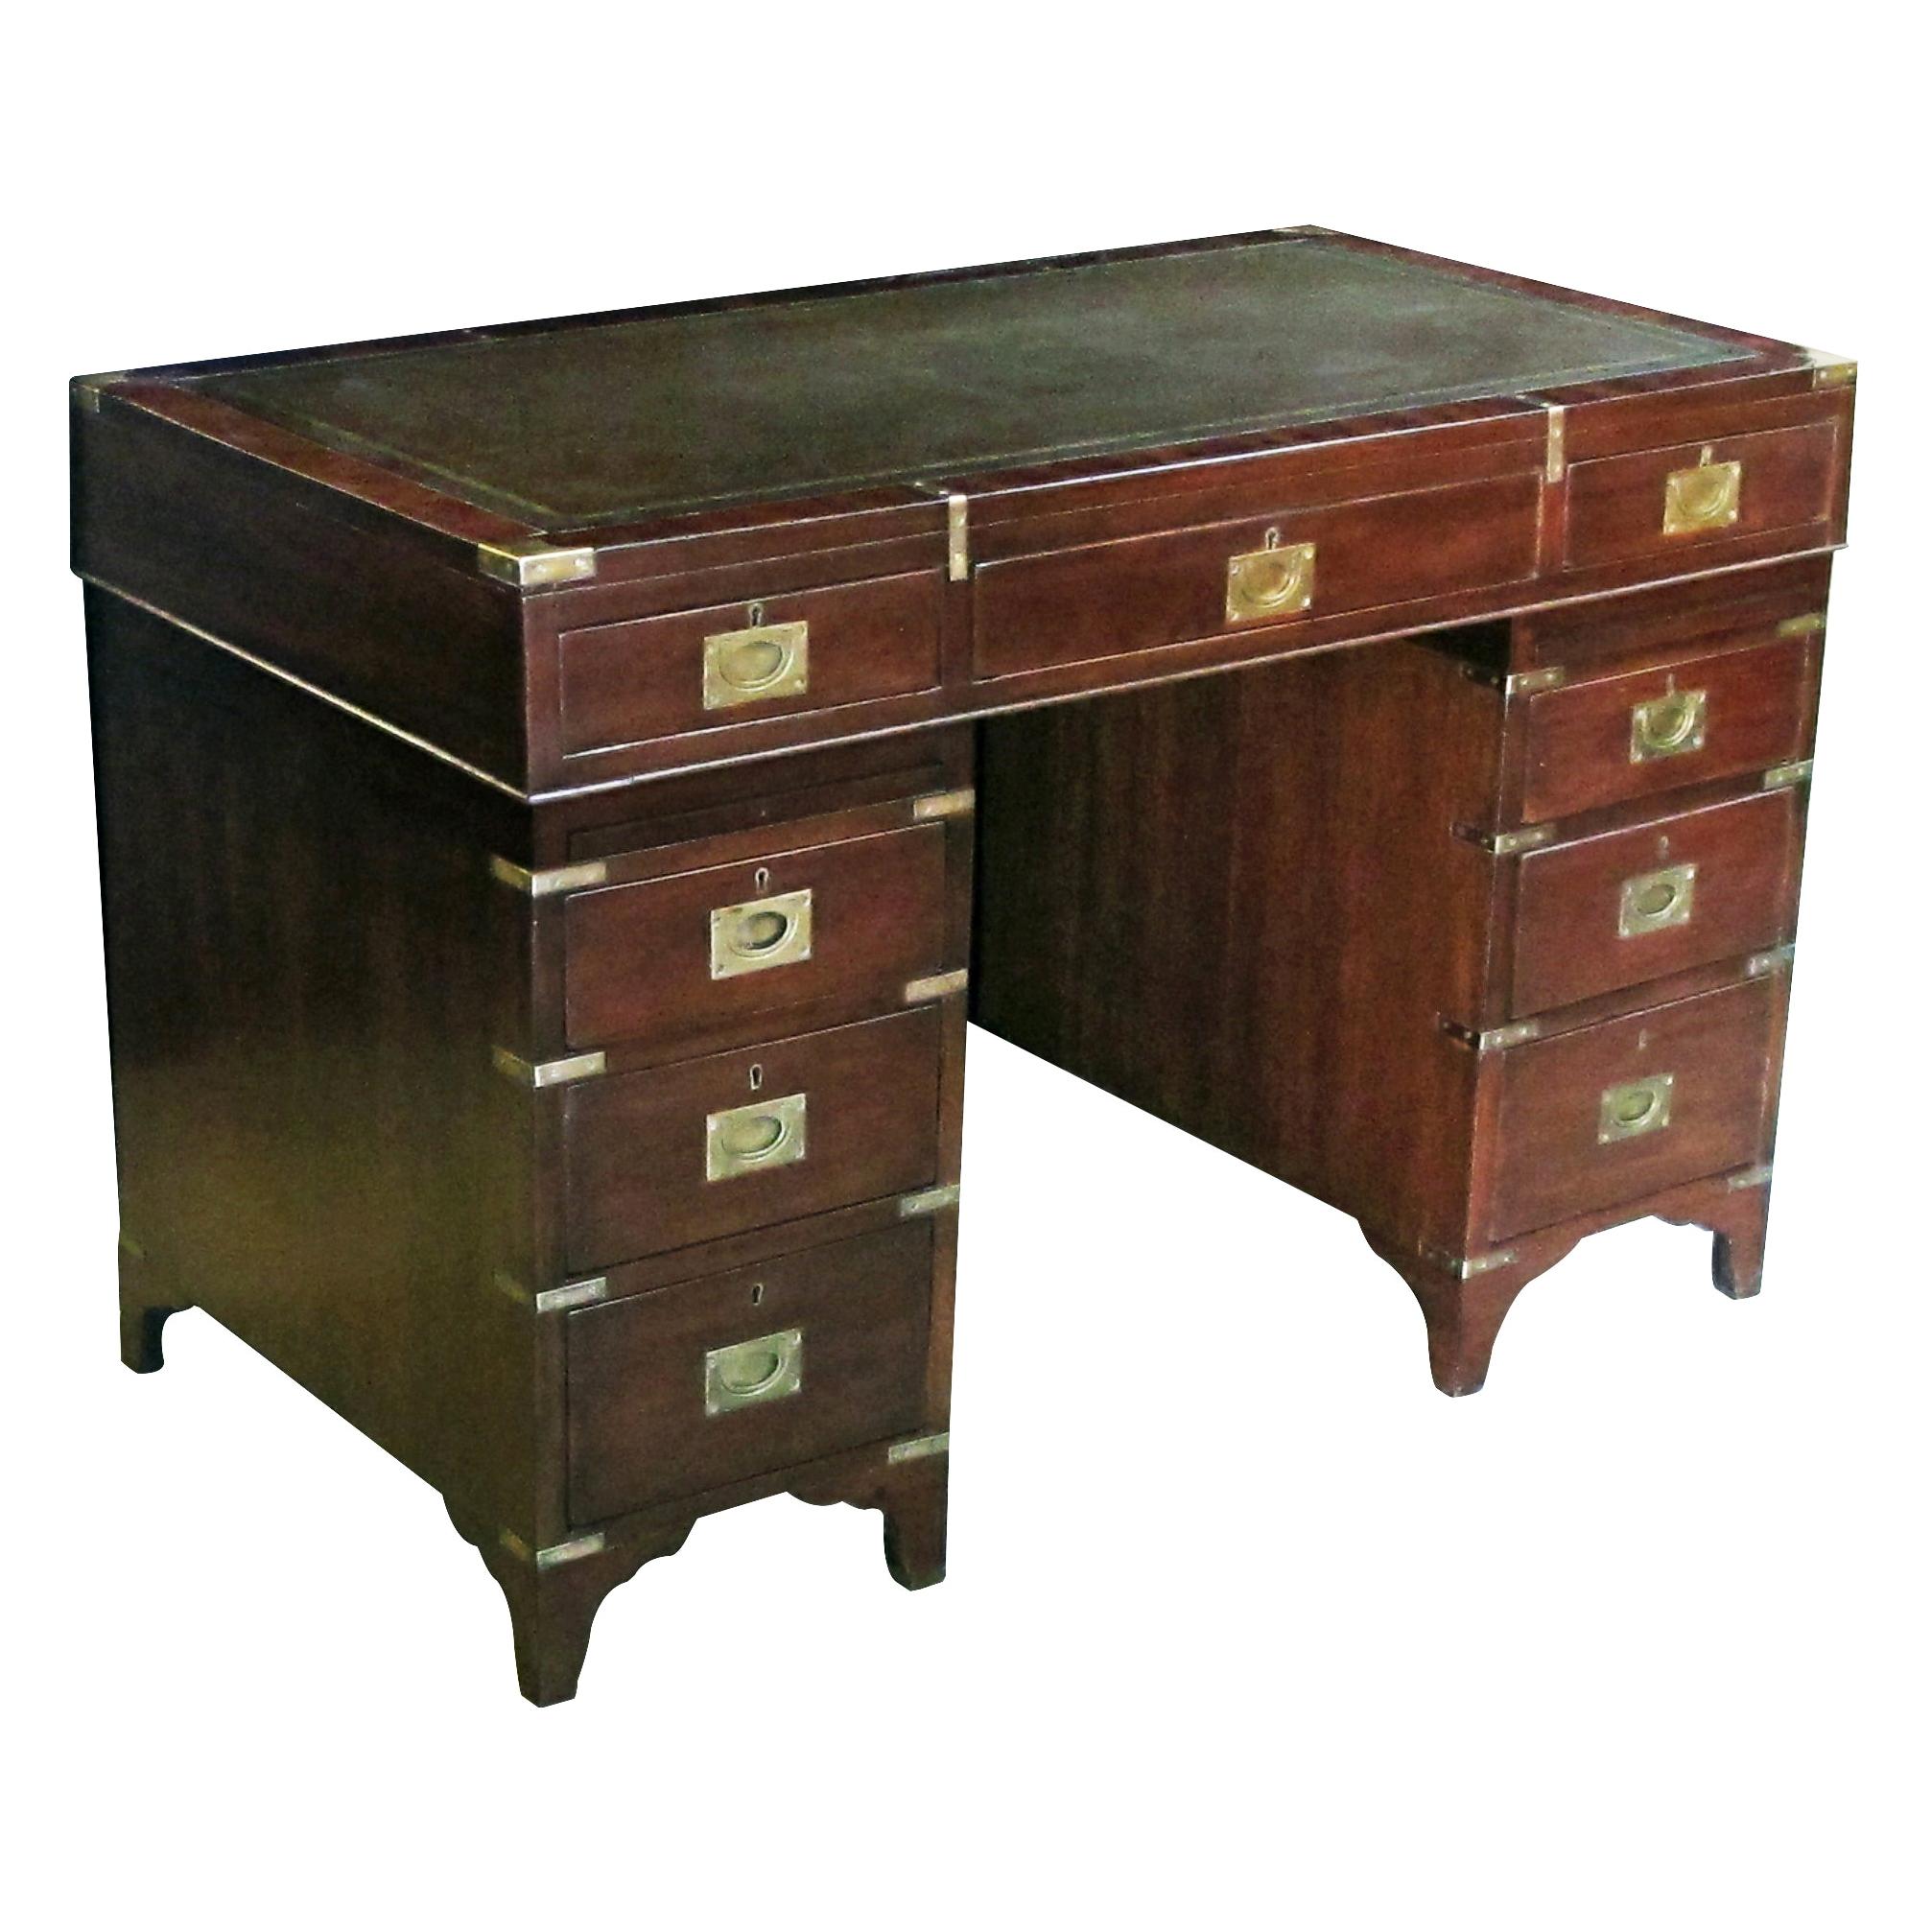 Handsome English 9-Drawer Mahogany Campaign Desk with Sage-Green Leather Top For Sale